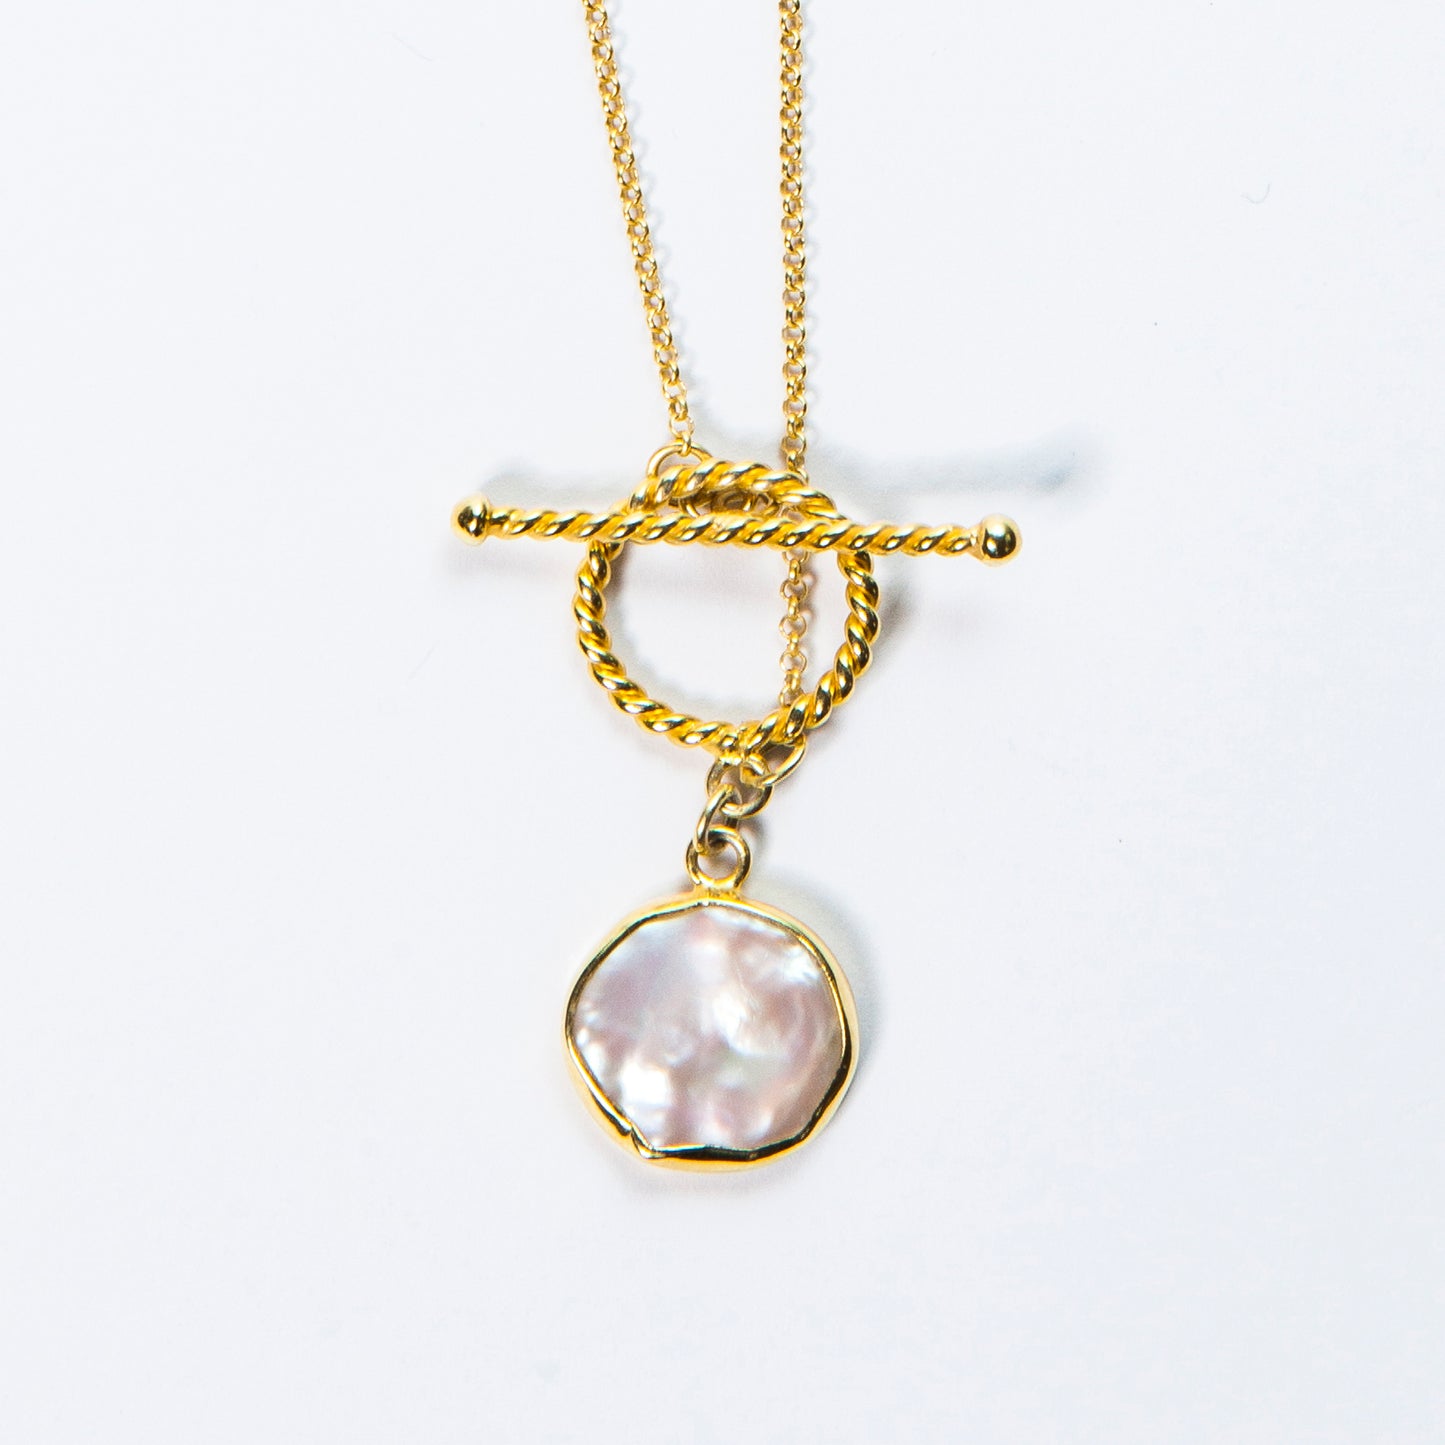 Baroque Keshi Pearl Gold Fob Necklace